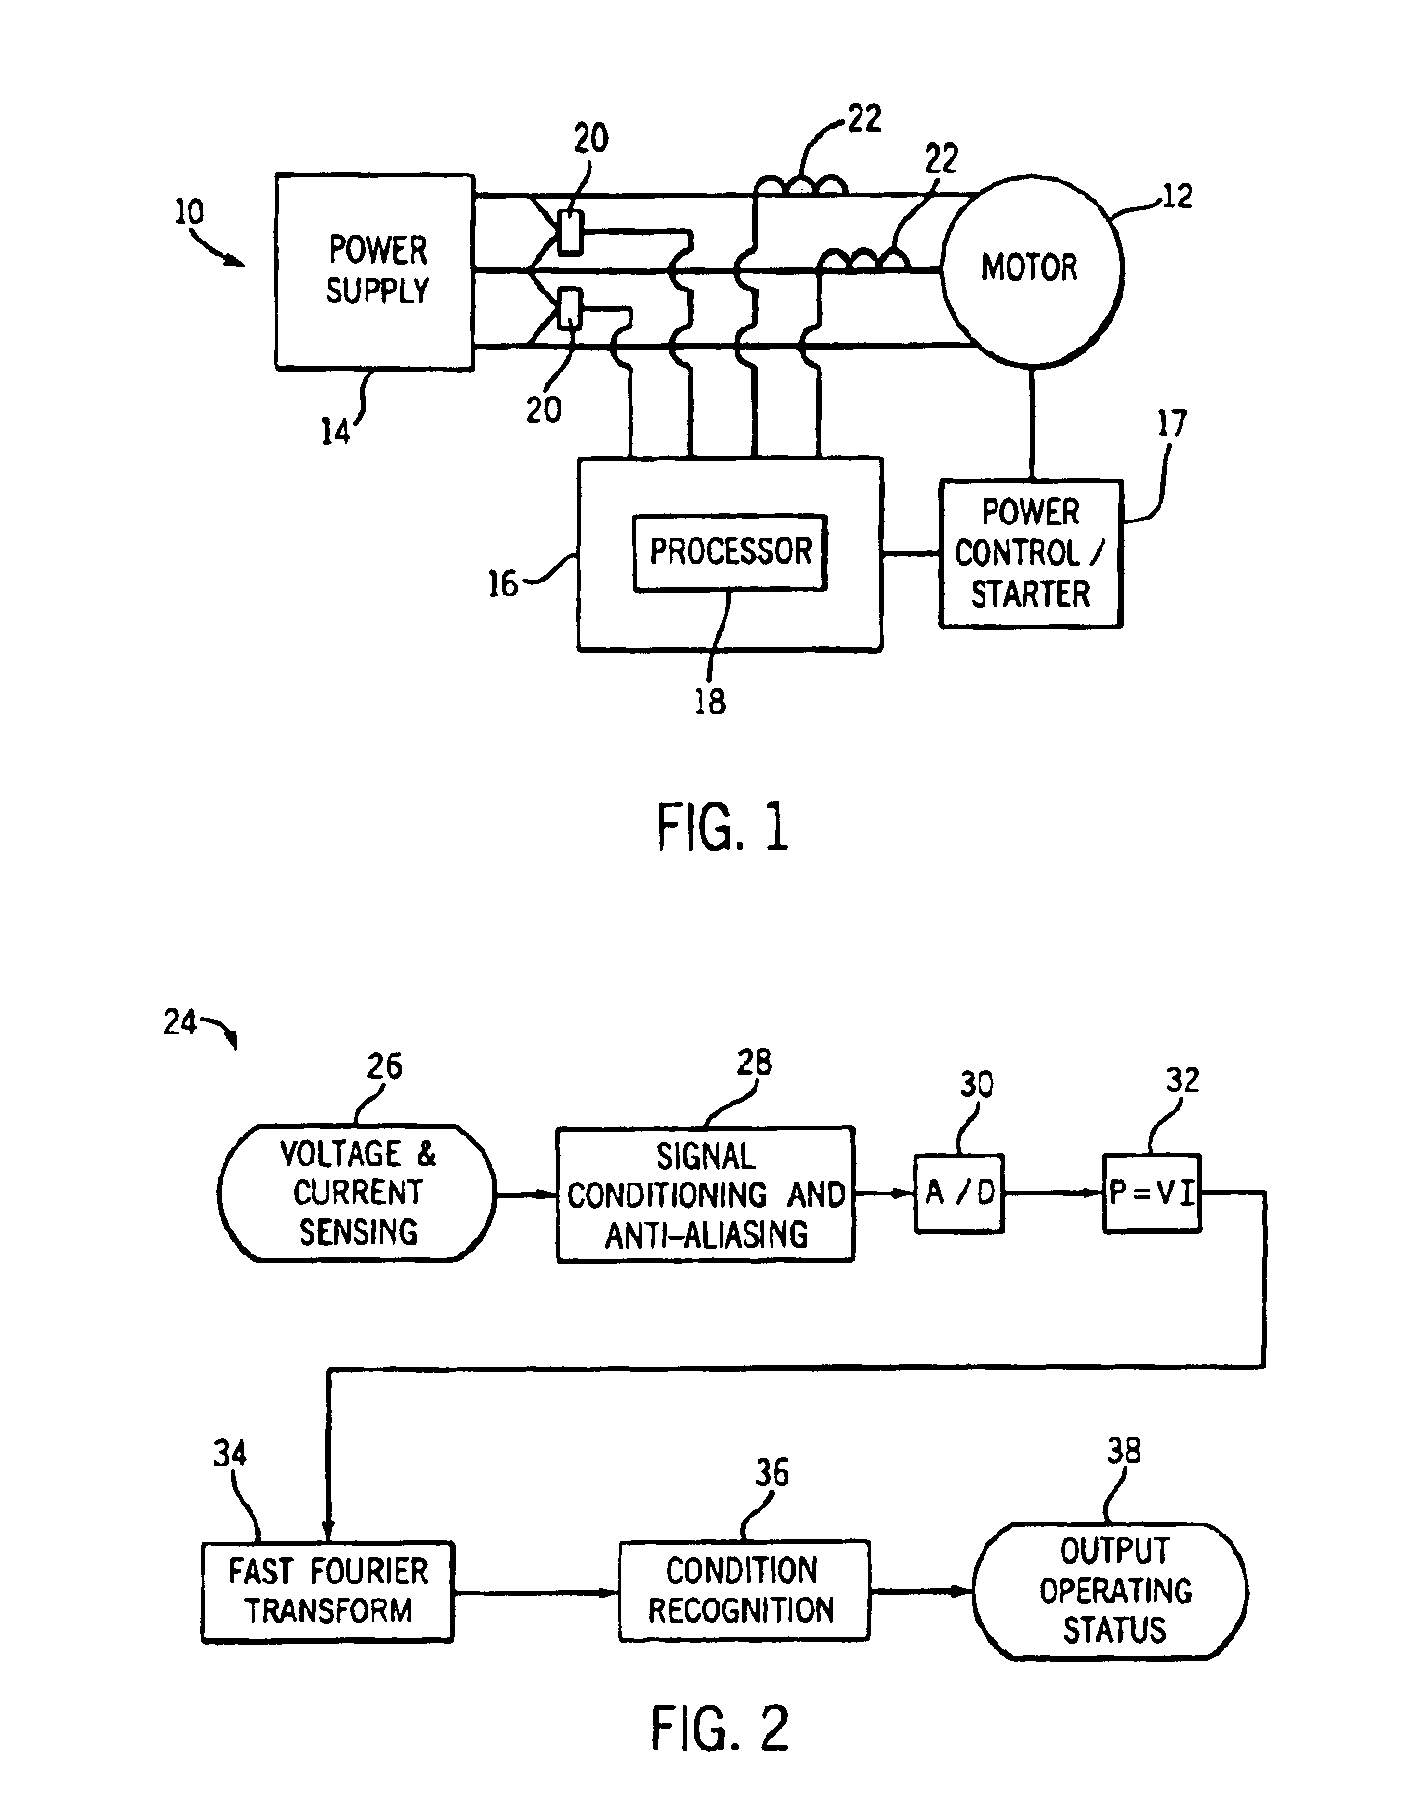 Method and apparatus of detecting disturbances in a centrifugal pump